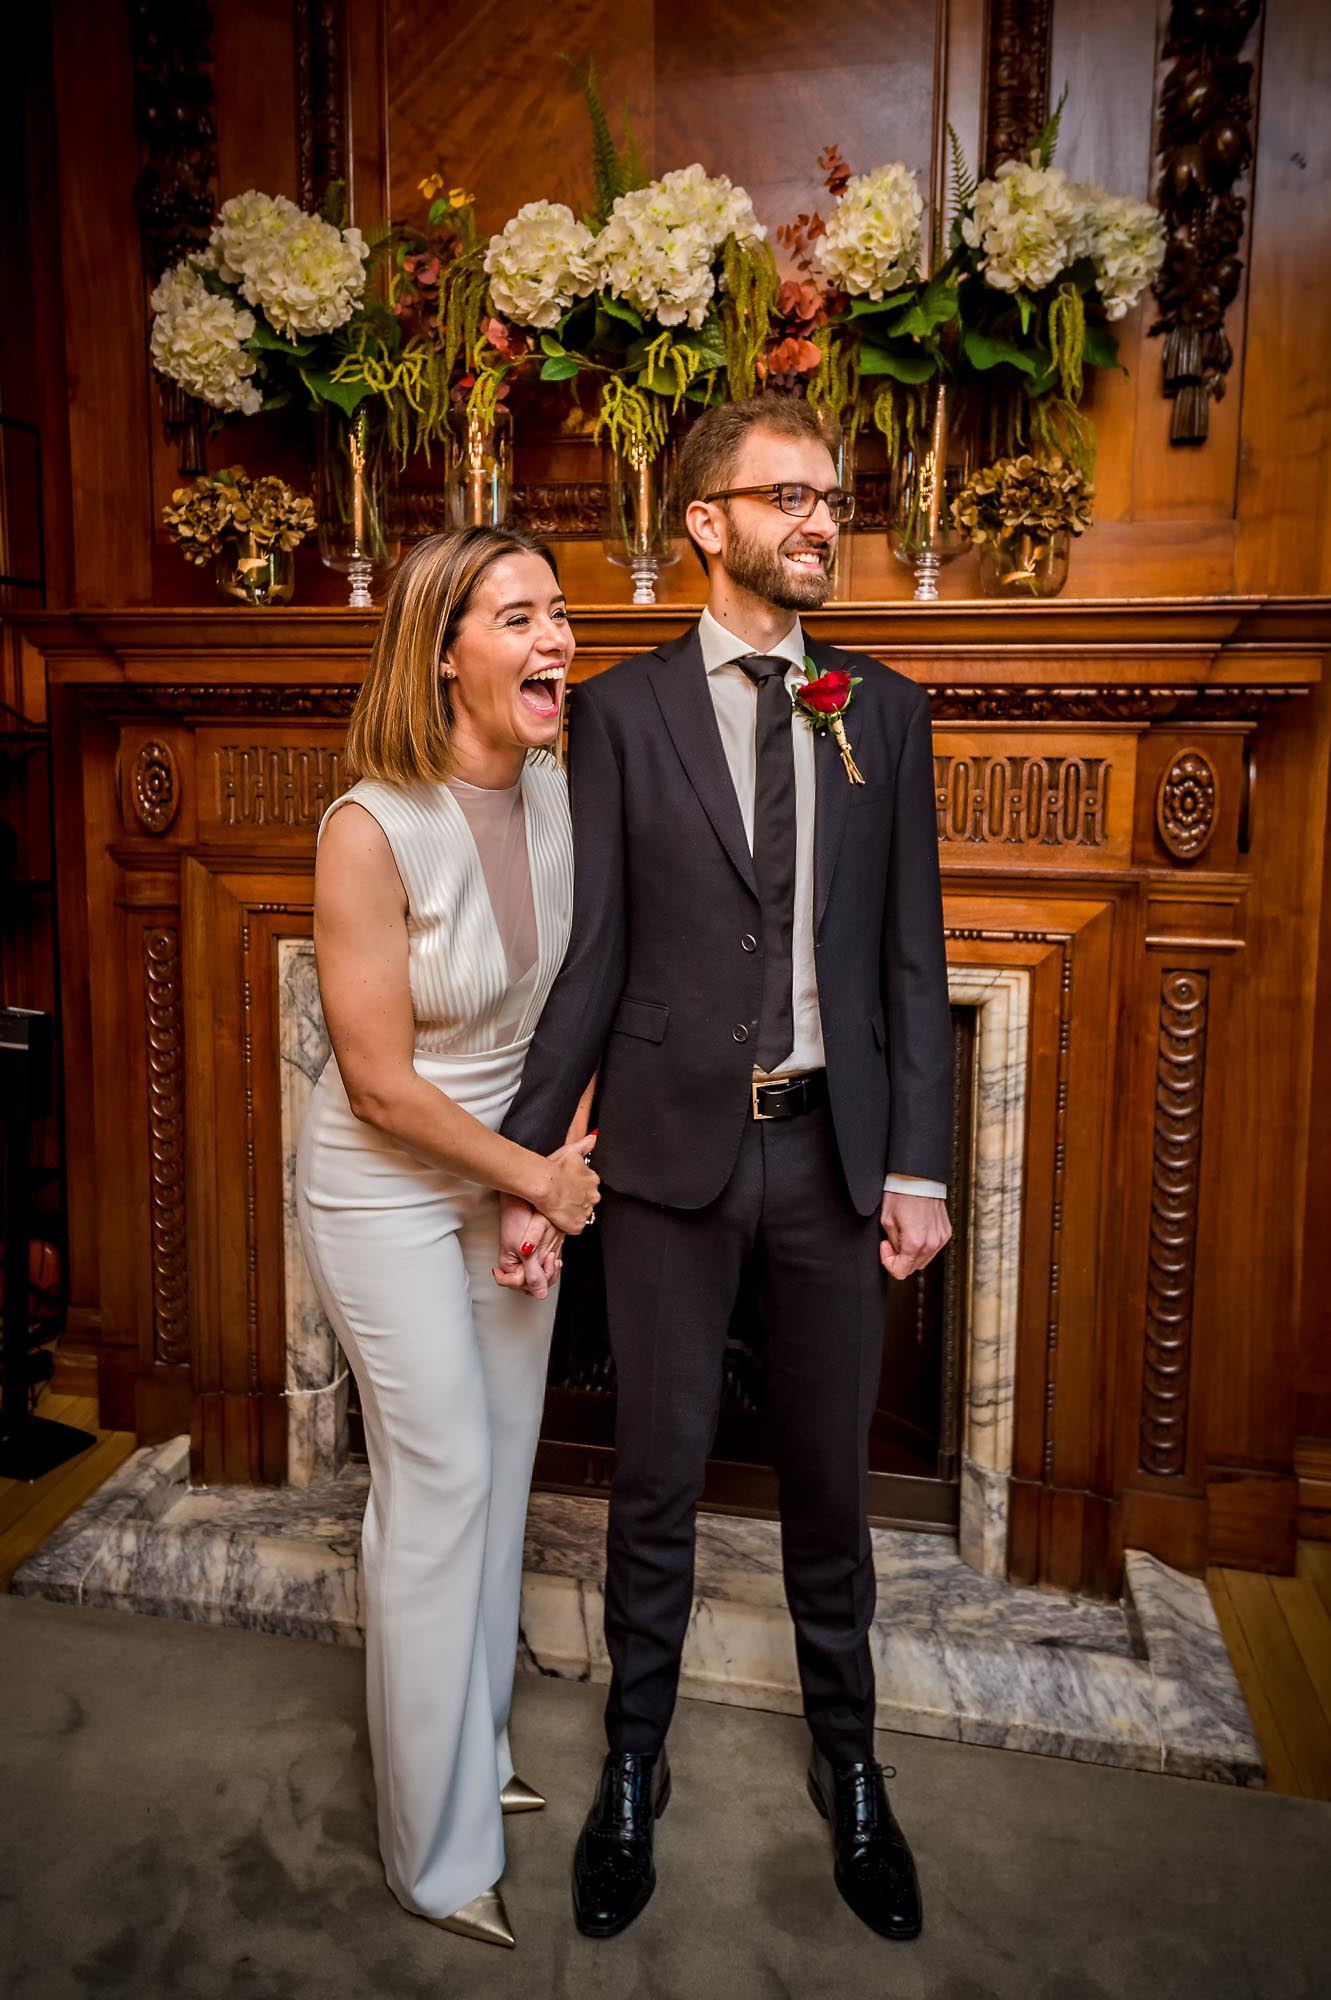 Bride laughing out loud with groom in front of wooden fireplace at Old Marylebone Town Hall